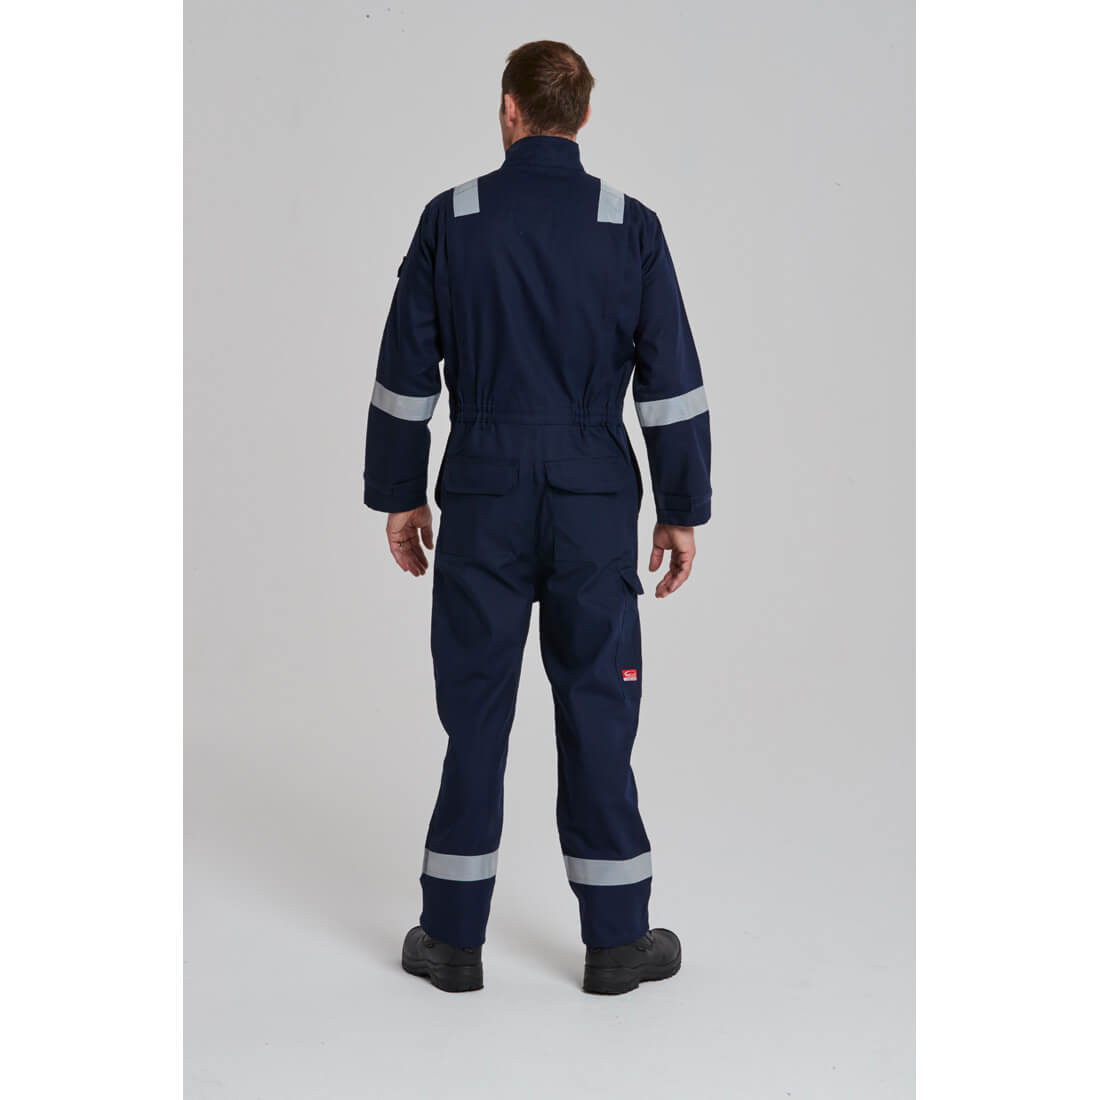 Bizflame Ultra Coverall - Safetywear